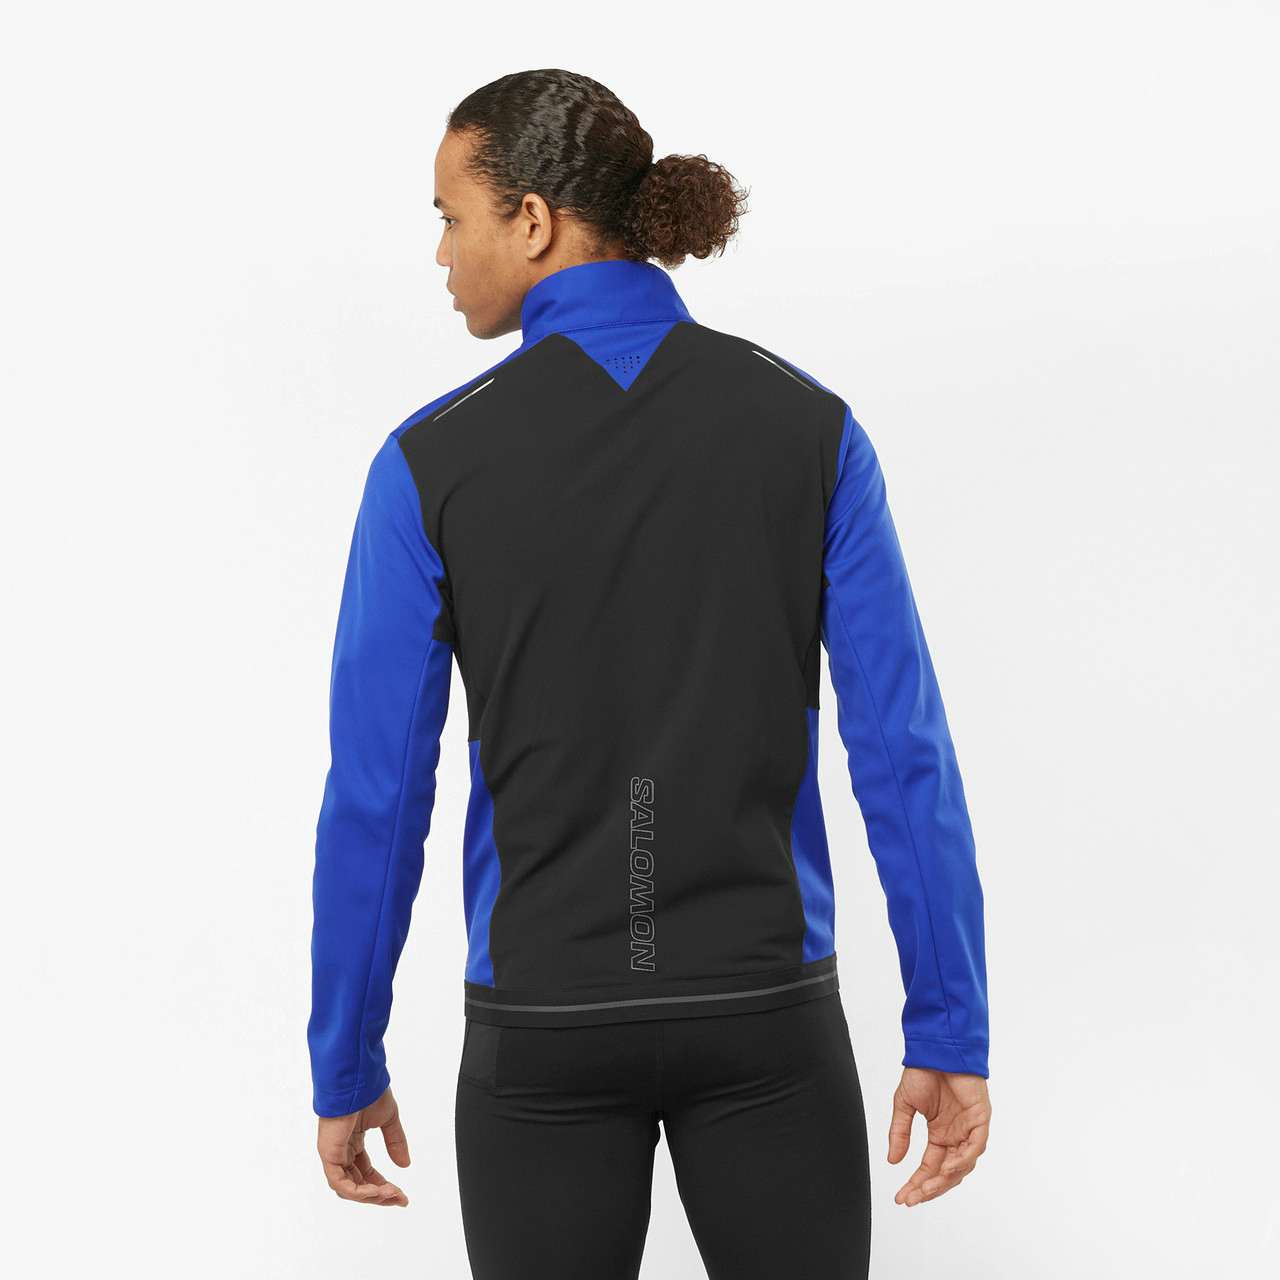 Gore-Tex Infinium Windstopper Shell Jacket Surf the Web